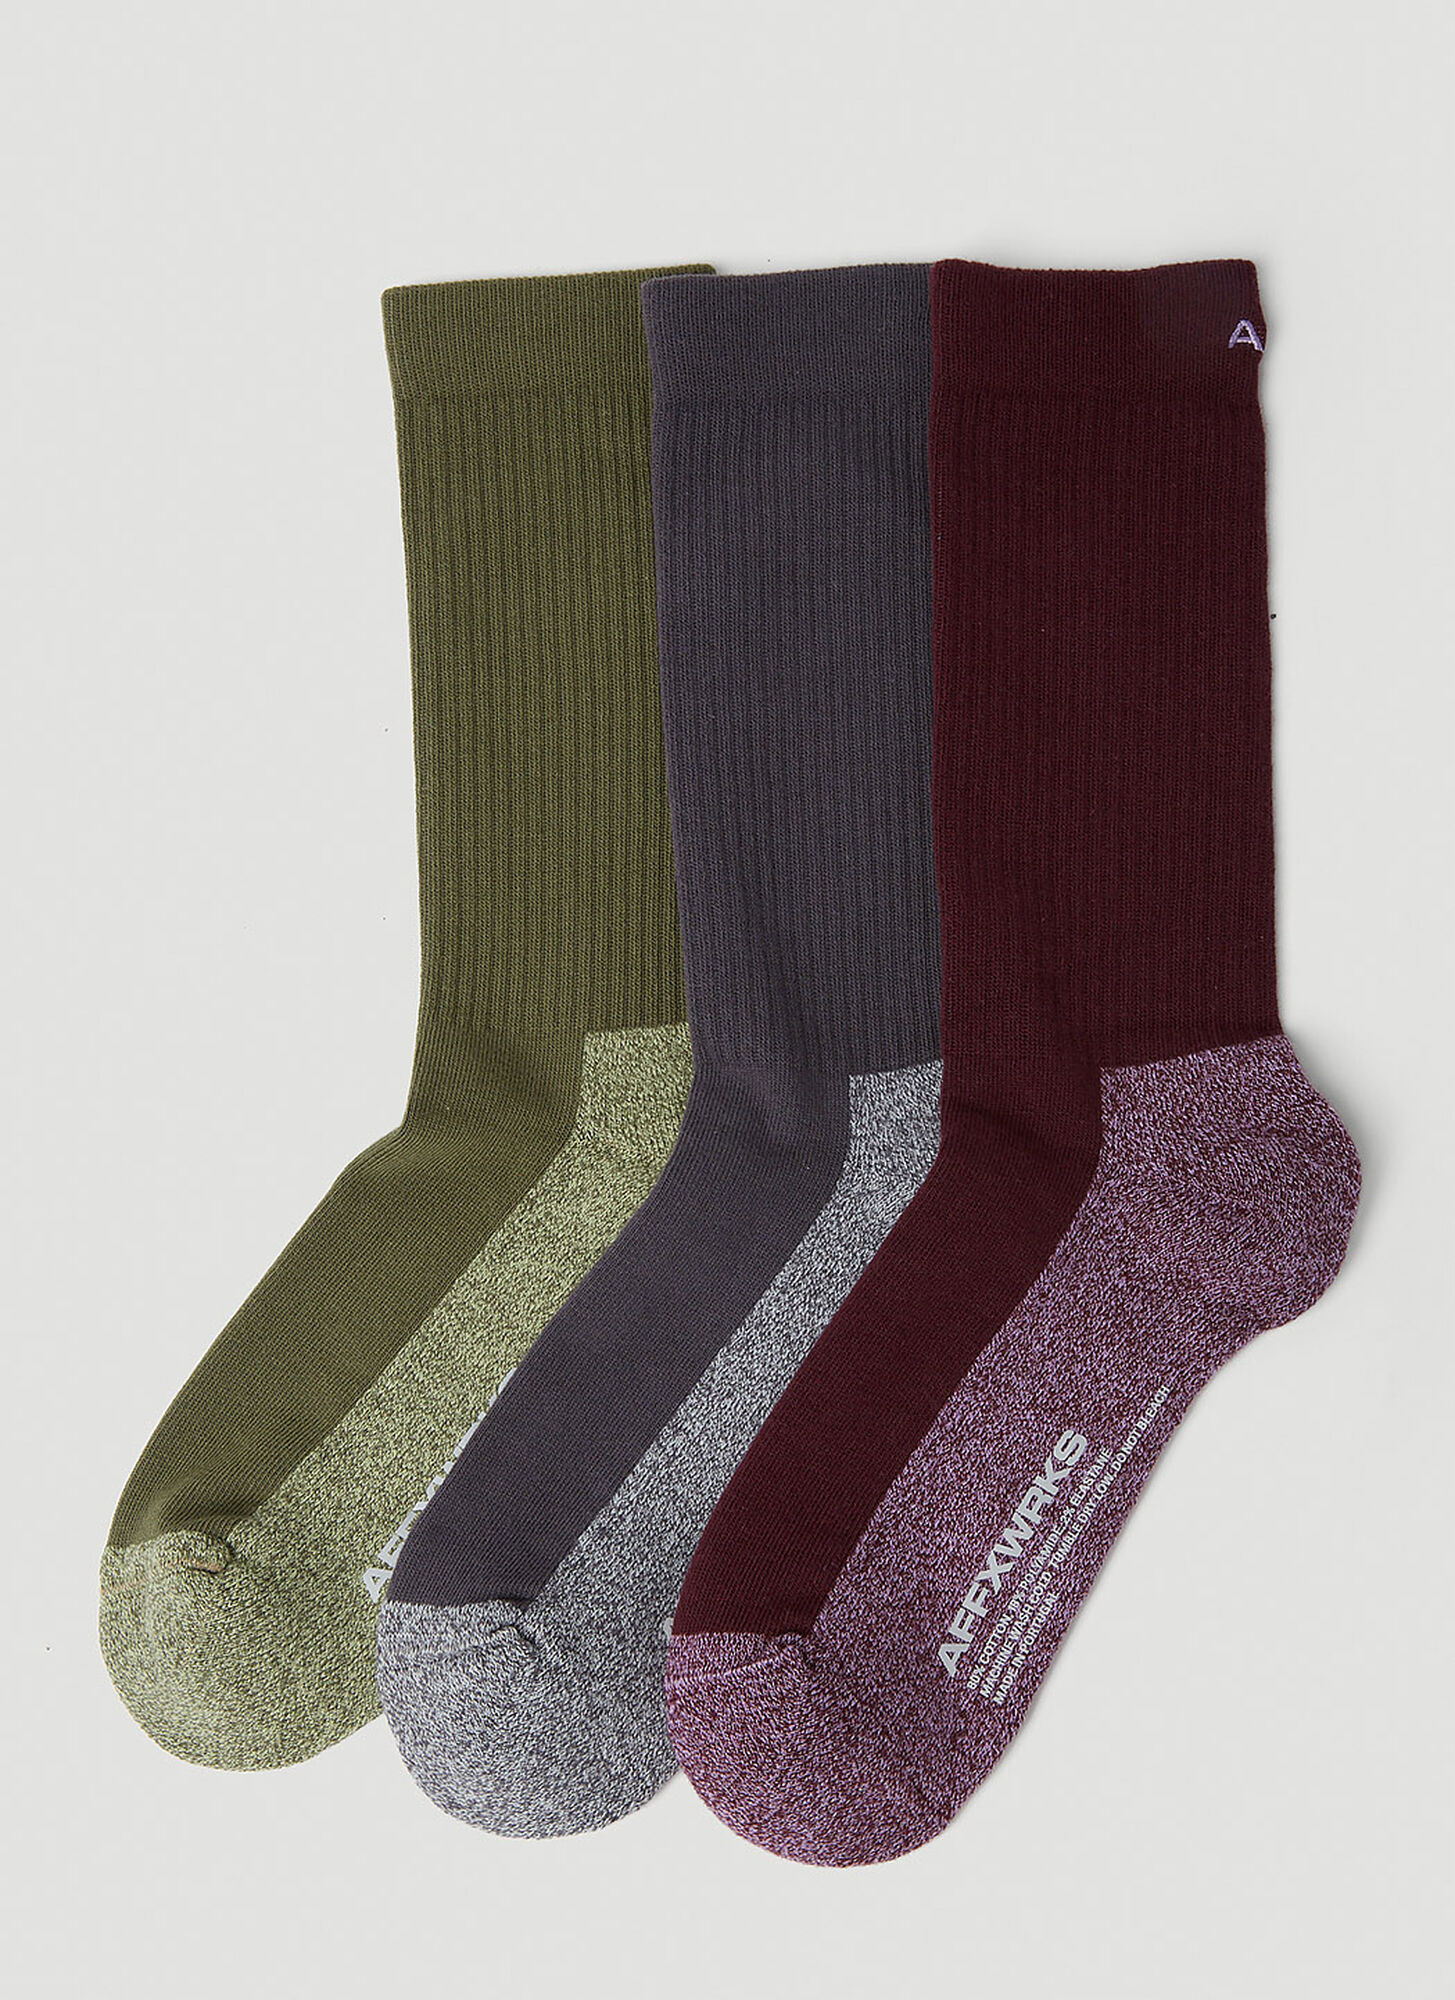 AFFXWRKS AFFXWRKS PACK OF THREE DUO-TONE SOCKS MALE MULTICOLOURMALE